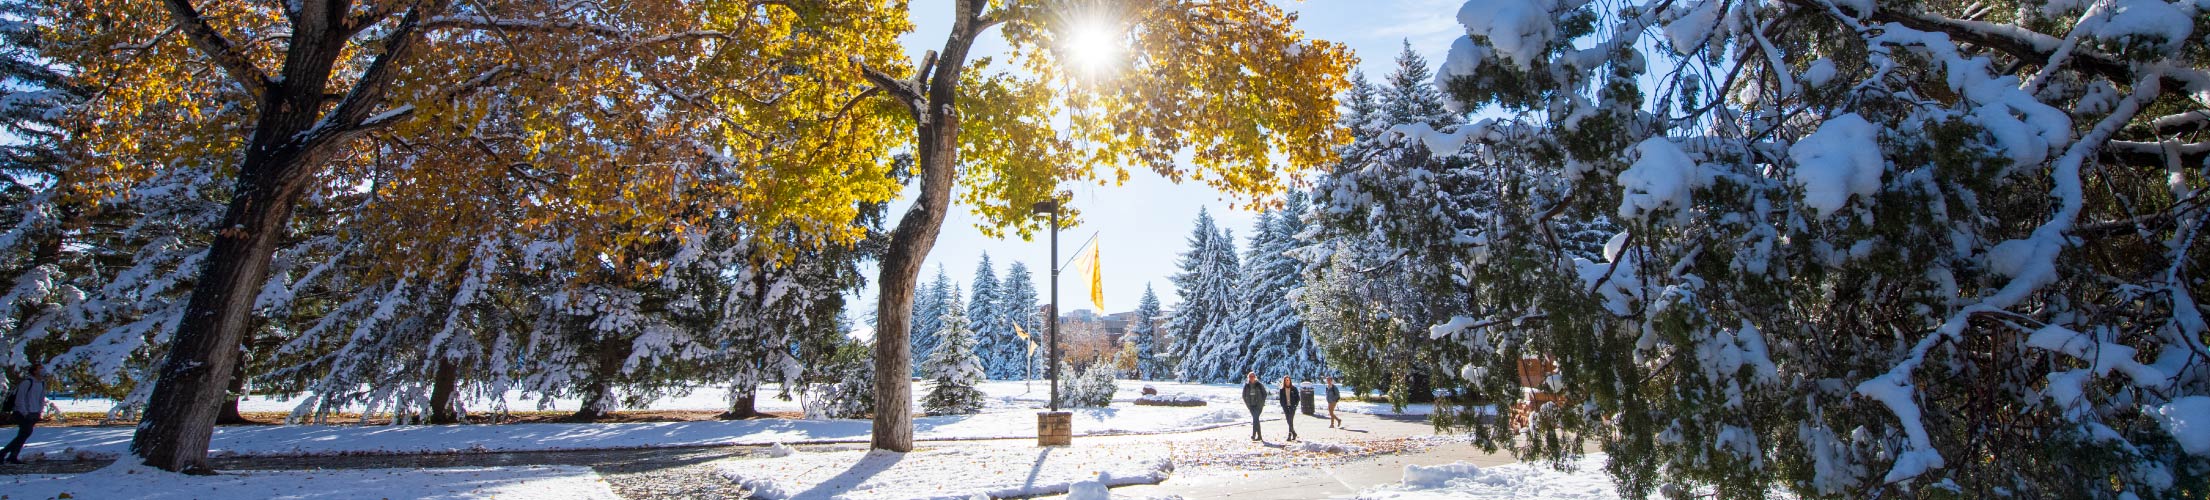 Students walk to class during a snowy fall day with the sun shining through the trees.